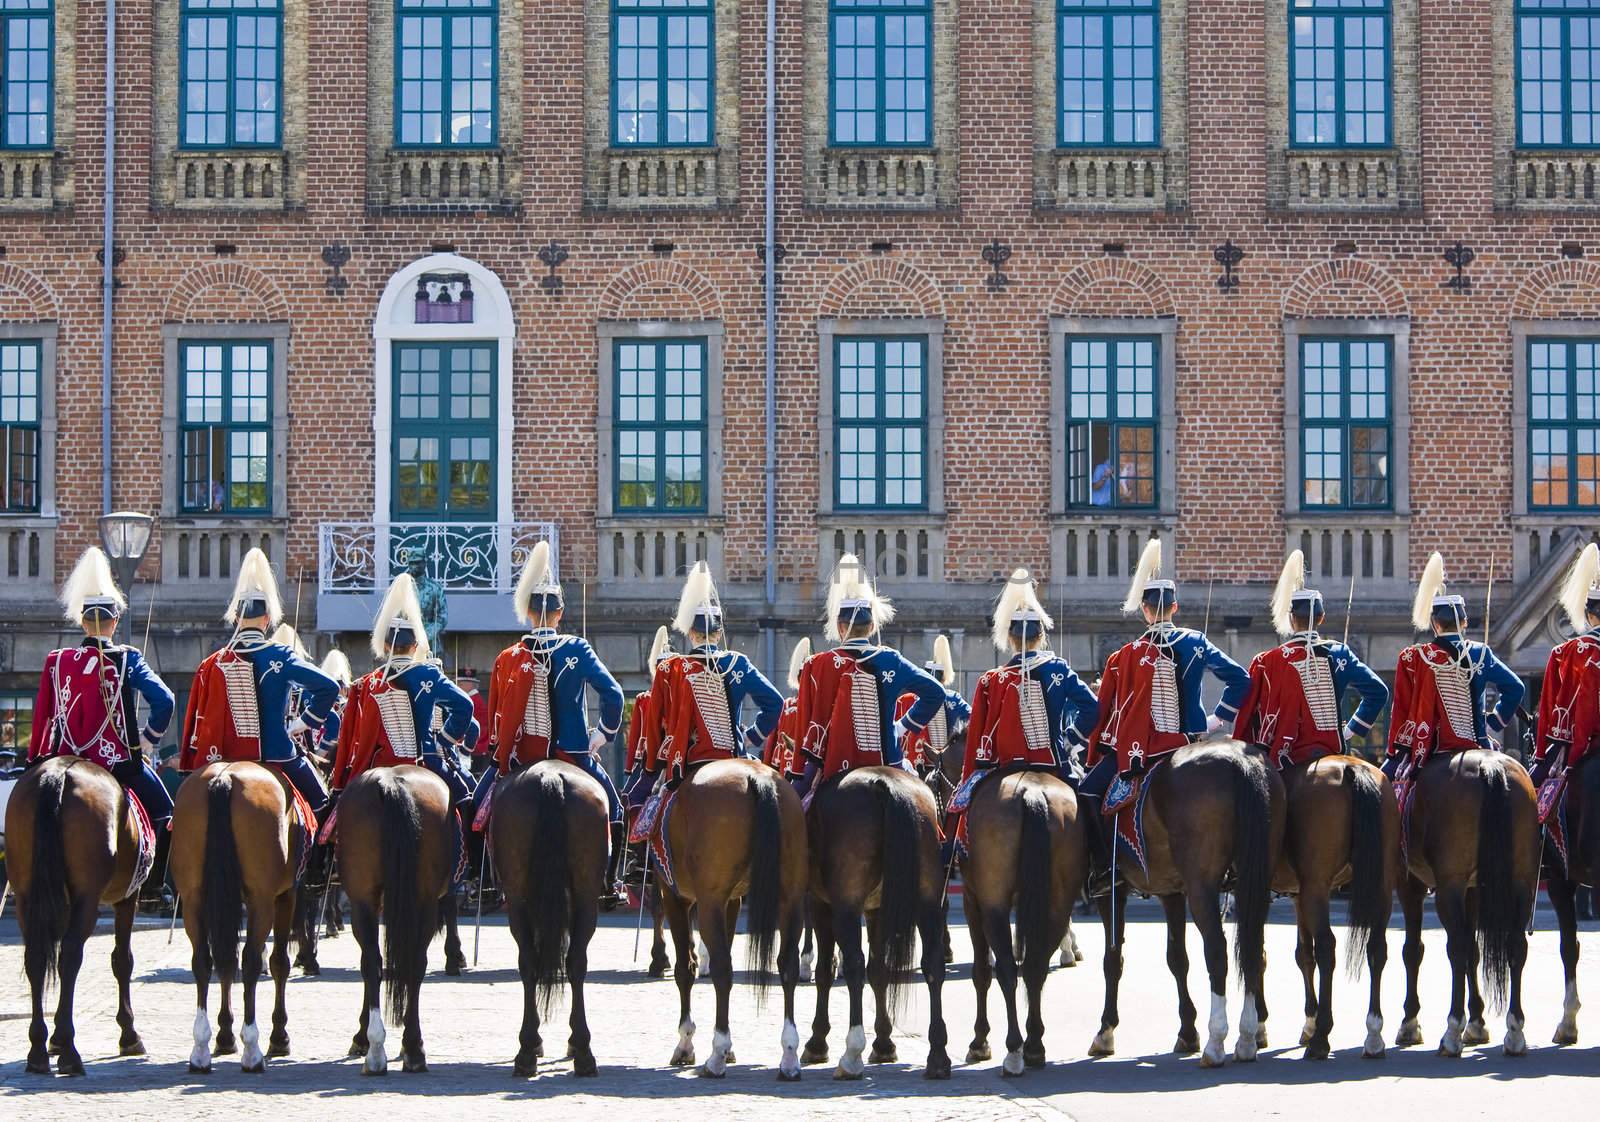 HM Queen Margrethe of Denmark arrives to the town hall of Nyborg, Denmark on official visit. Her horse guard protecting her and shows their respect.